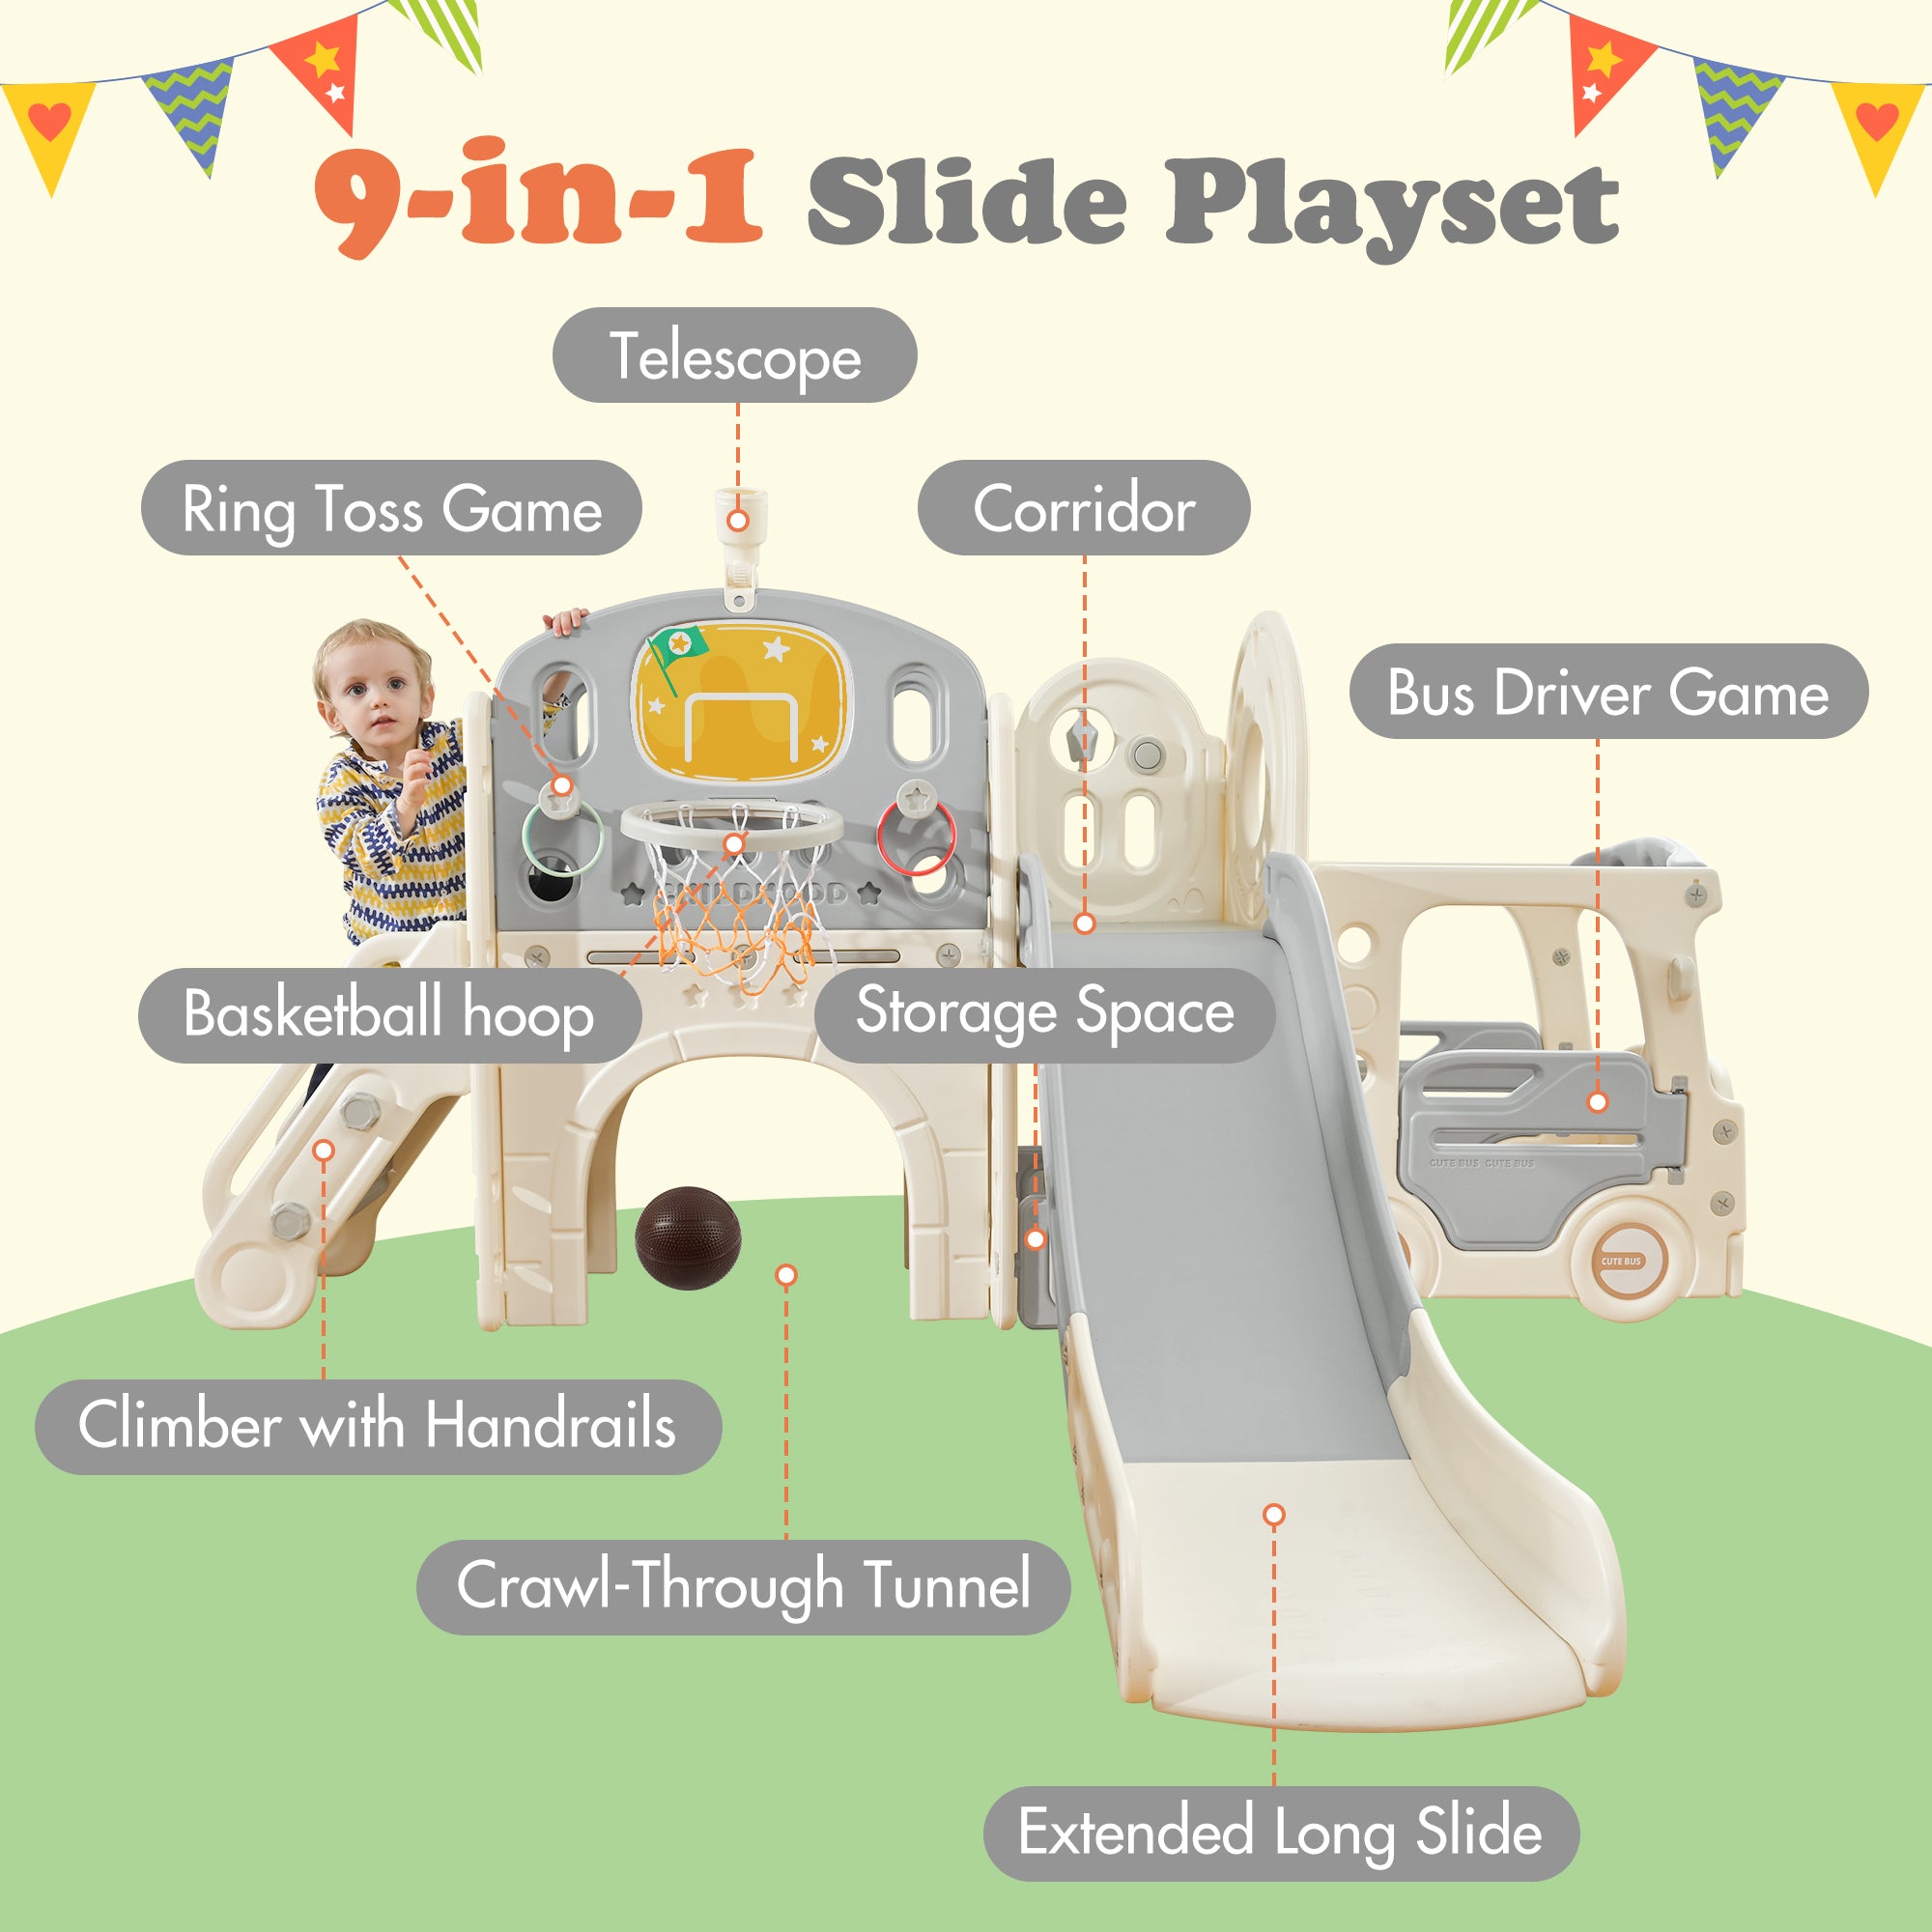 🆓🚛 Kids Slide Playset Structure 9 In 1, Freestanding Castle Climbing Crawling Playhouse With Slide, Arch Tunnel, Ring Toss, Realistic Bus Model & Basketball Hoop, Toy Storage Organizer for Toddlers, Gray & White